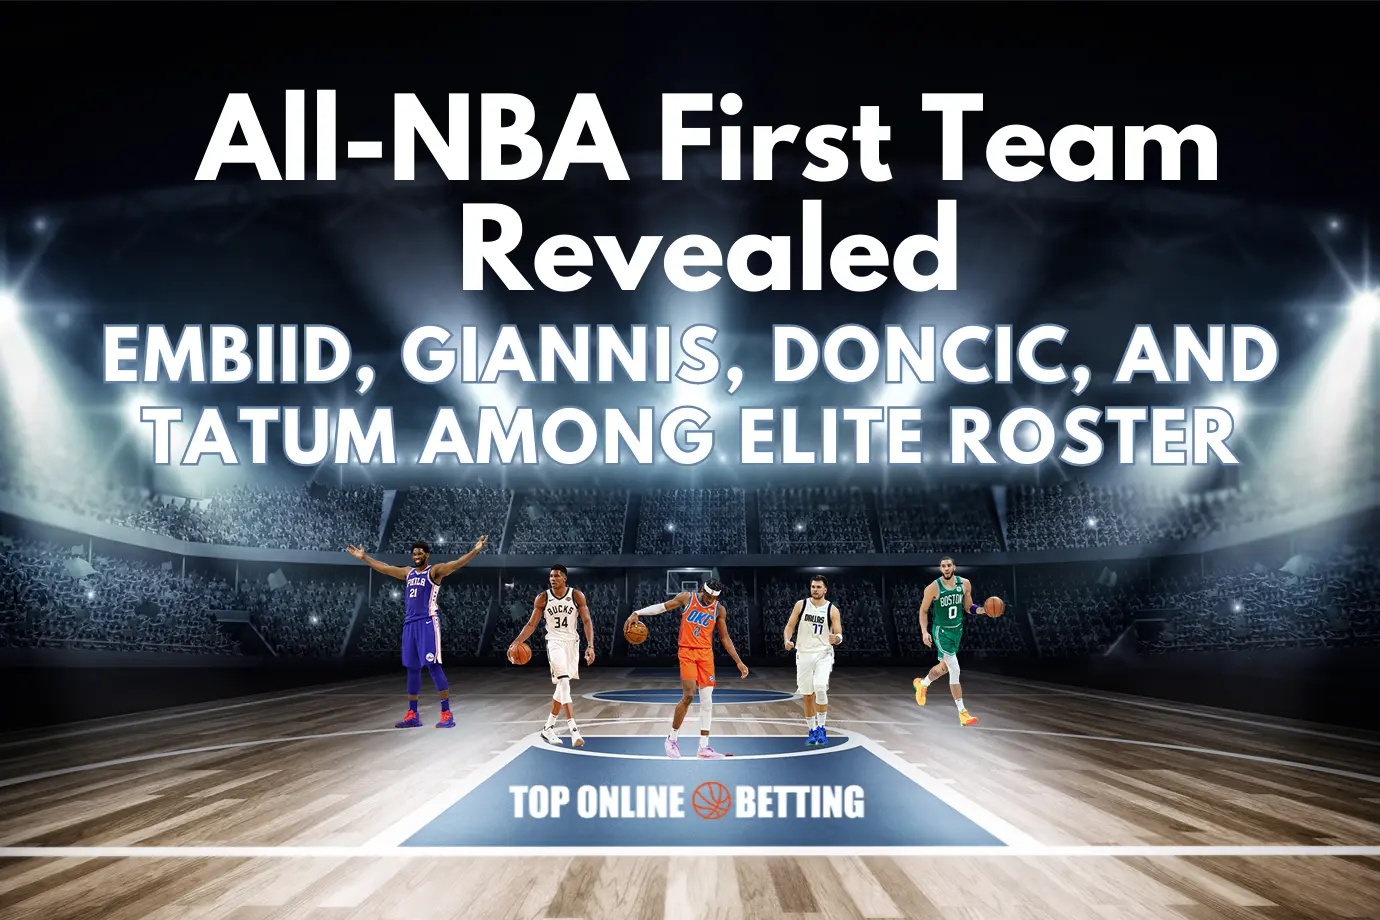 All-NBA First Team Revealed: Embiid, Giannis, Doncic, and Tatum Among Elite Roster